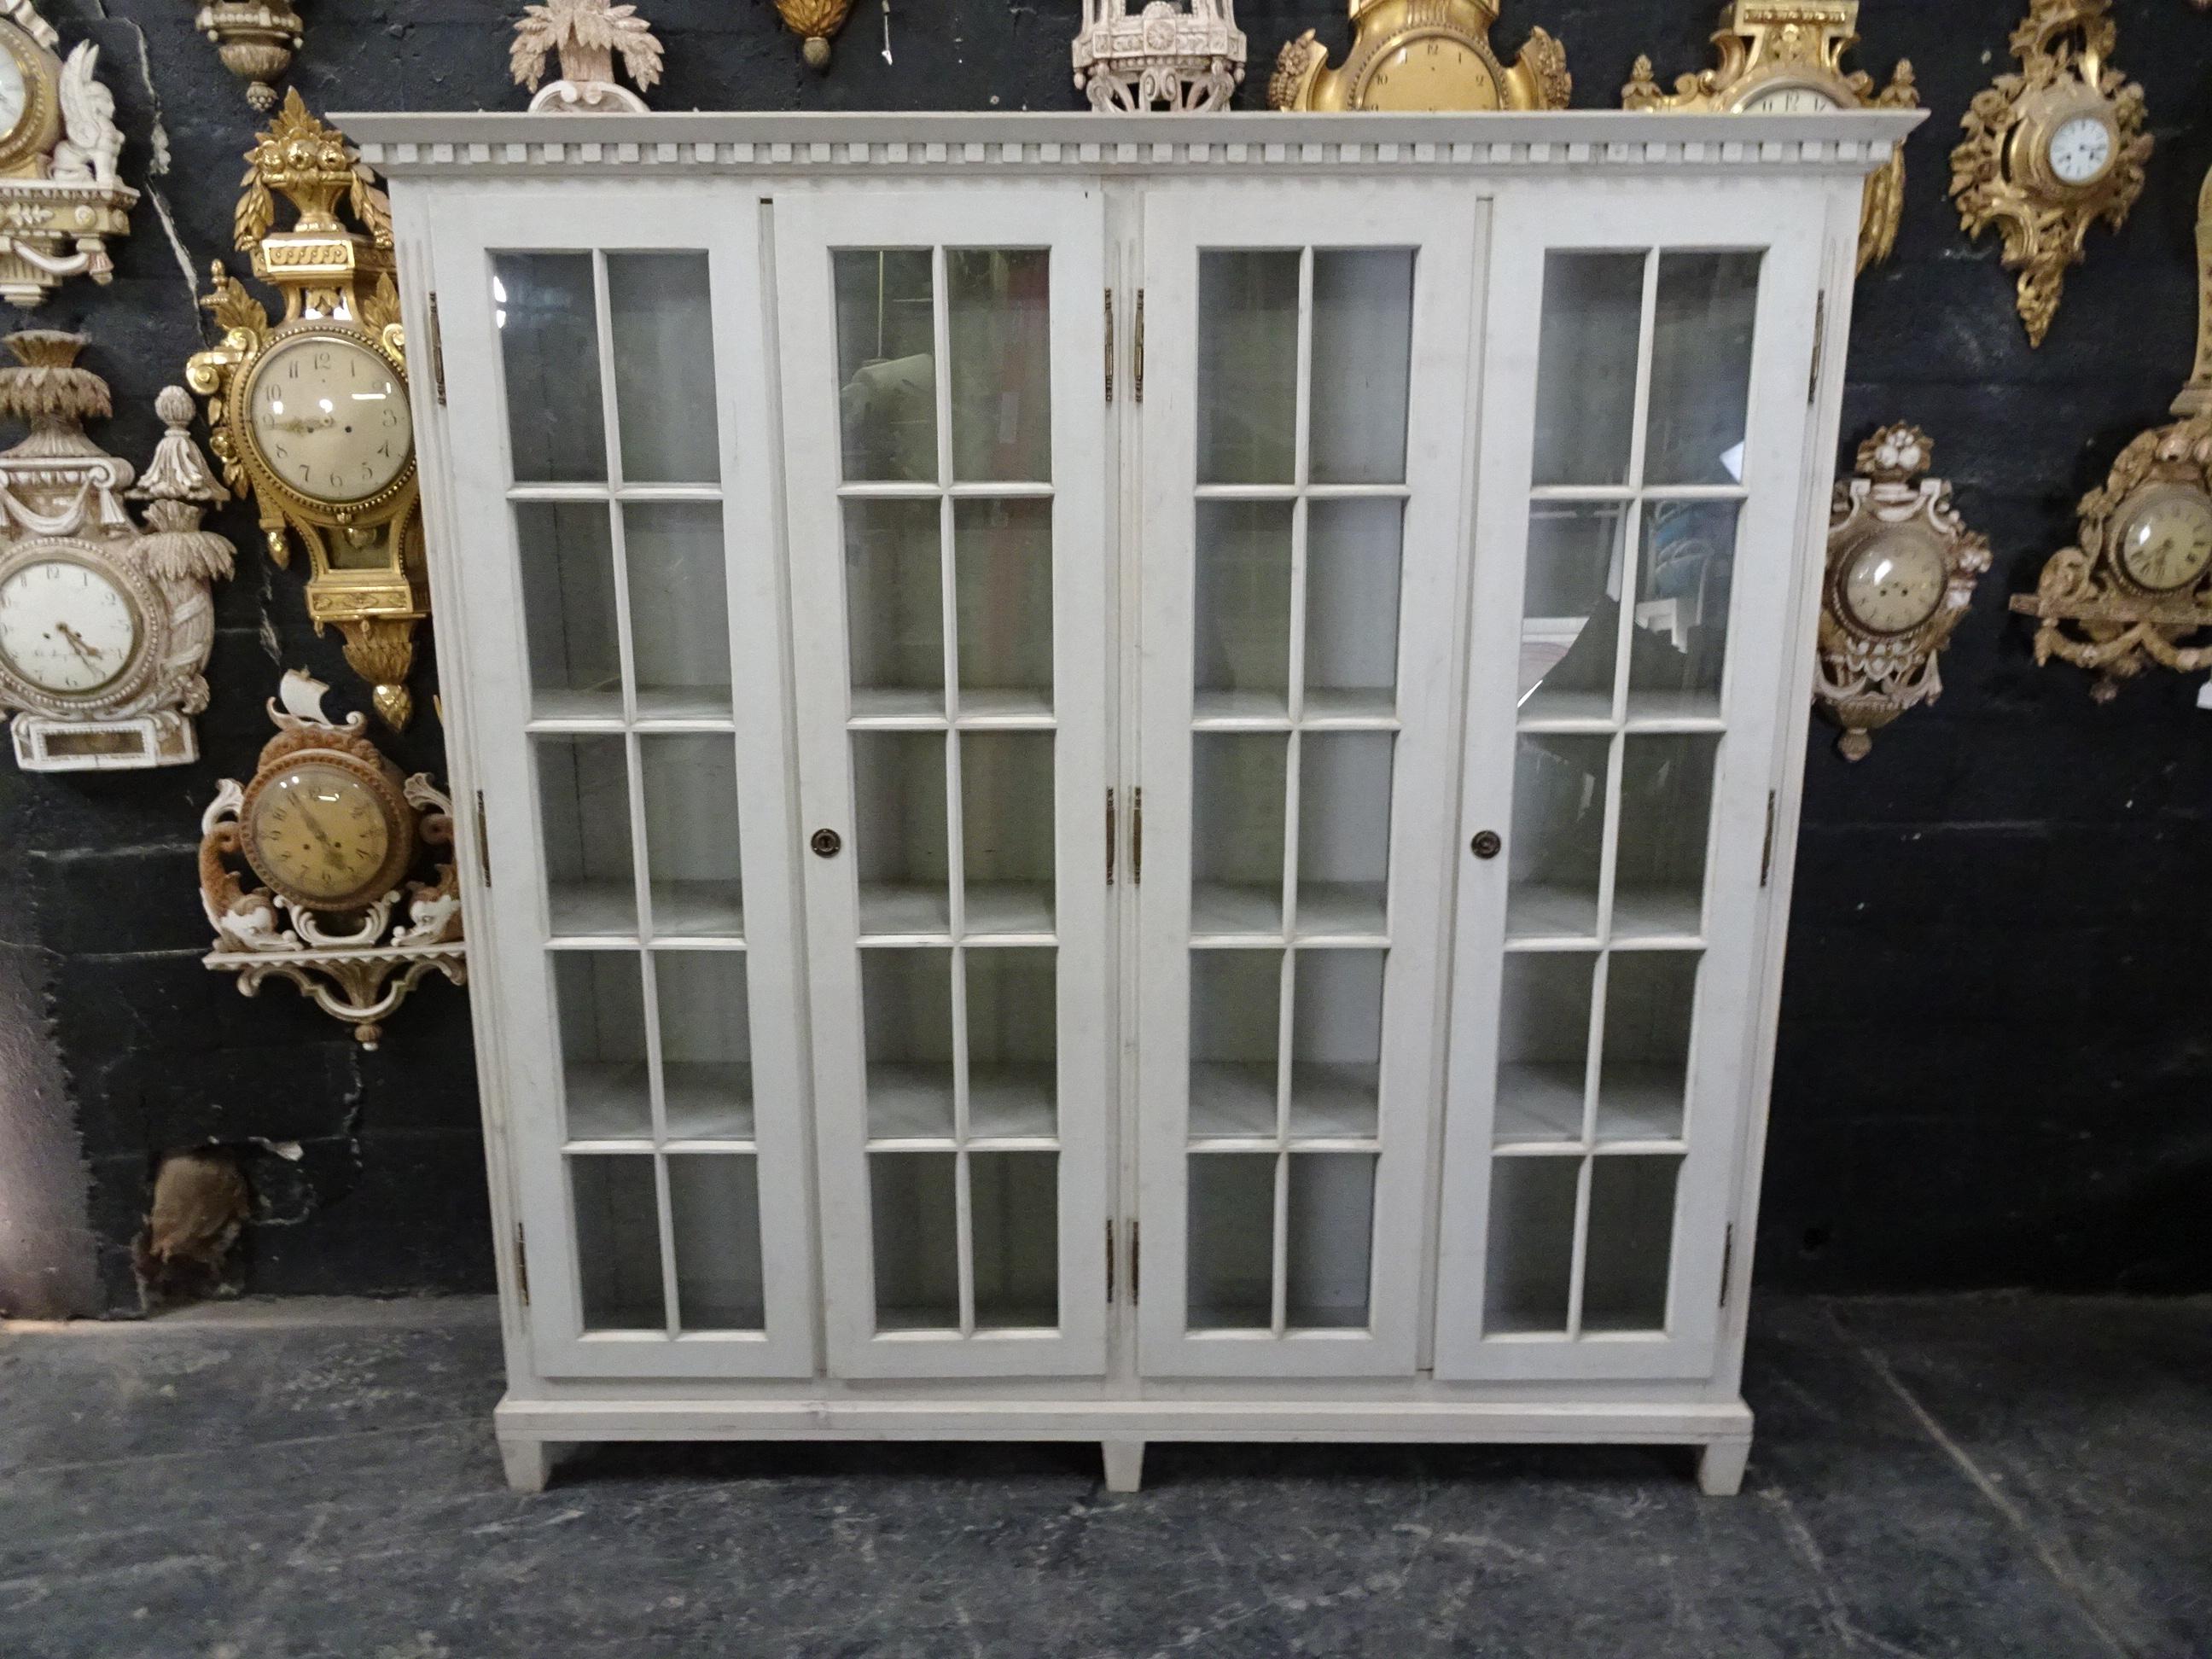 This is a Gustavian style 4-door glass cabinet, it’s been restored and repainted with milk paints 